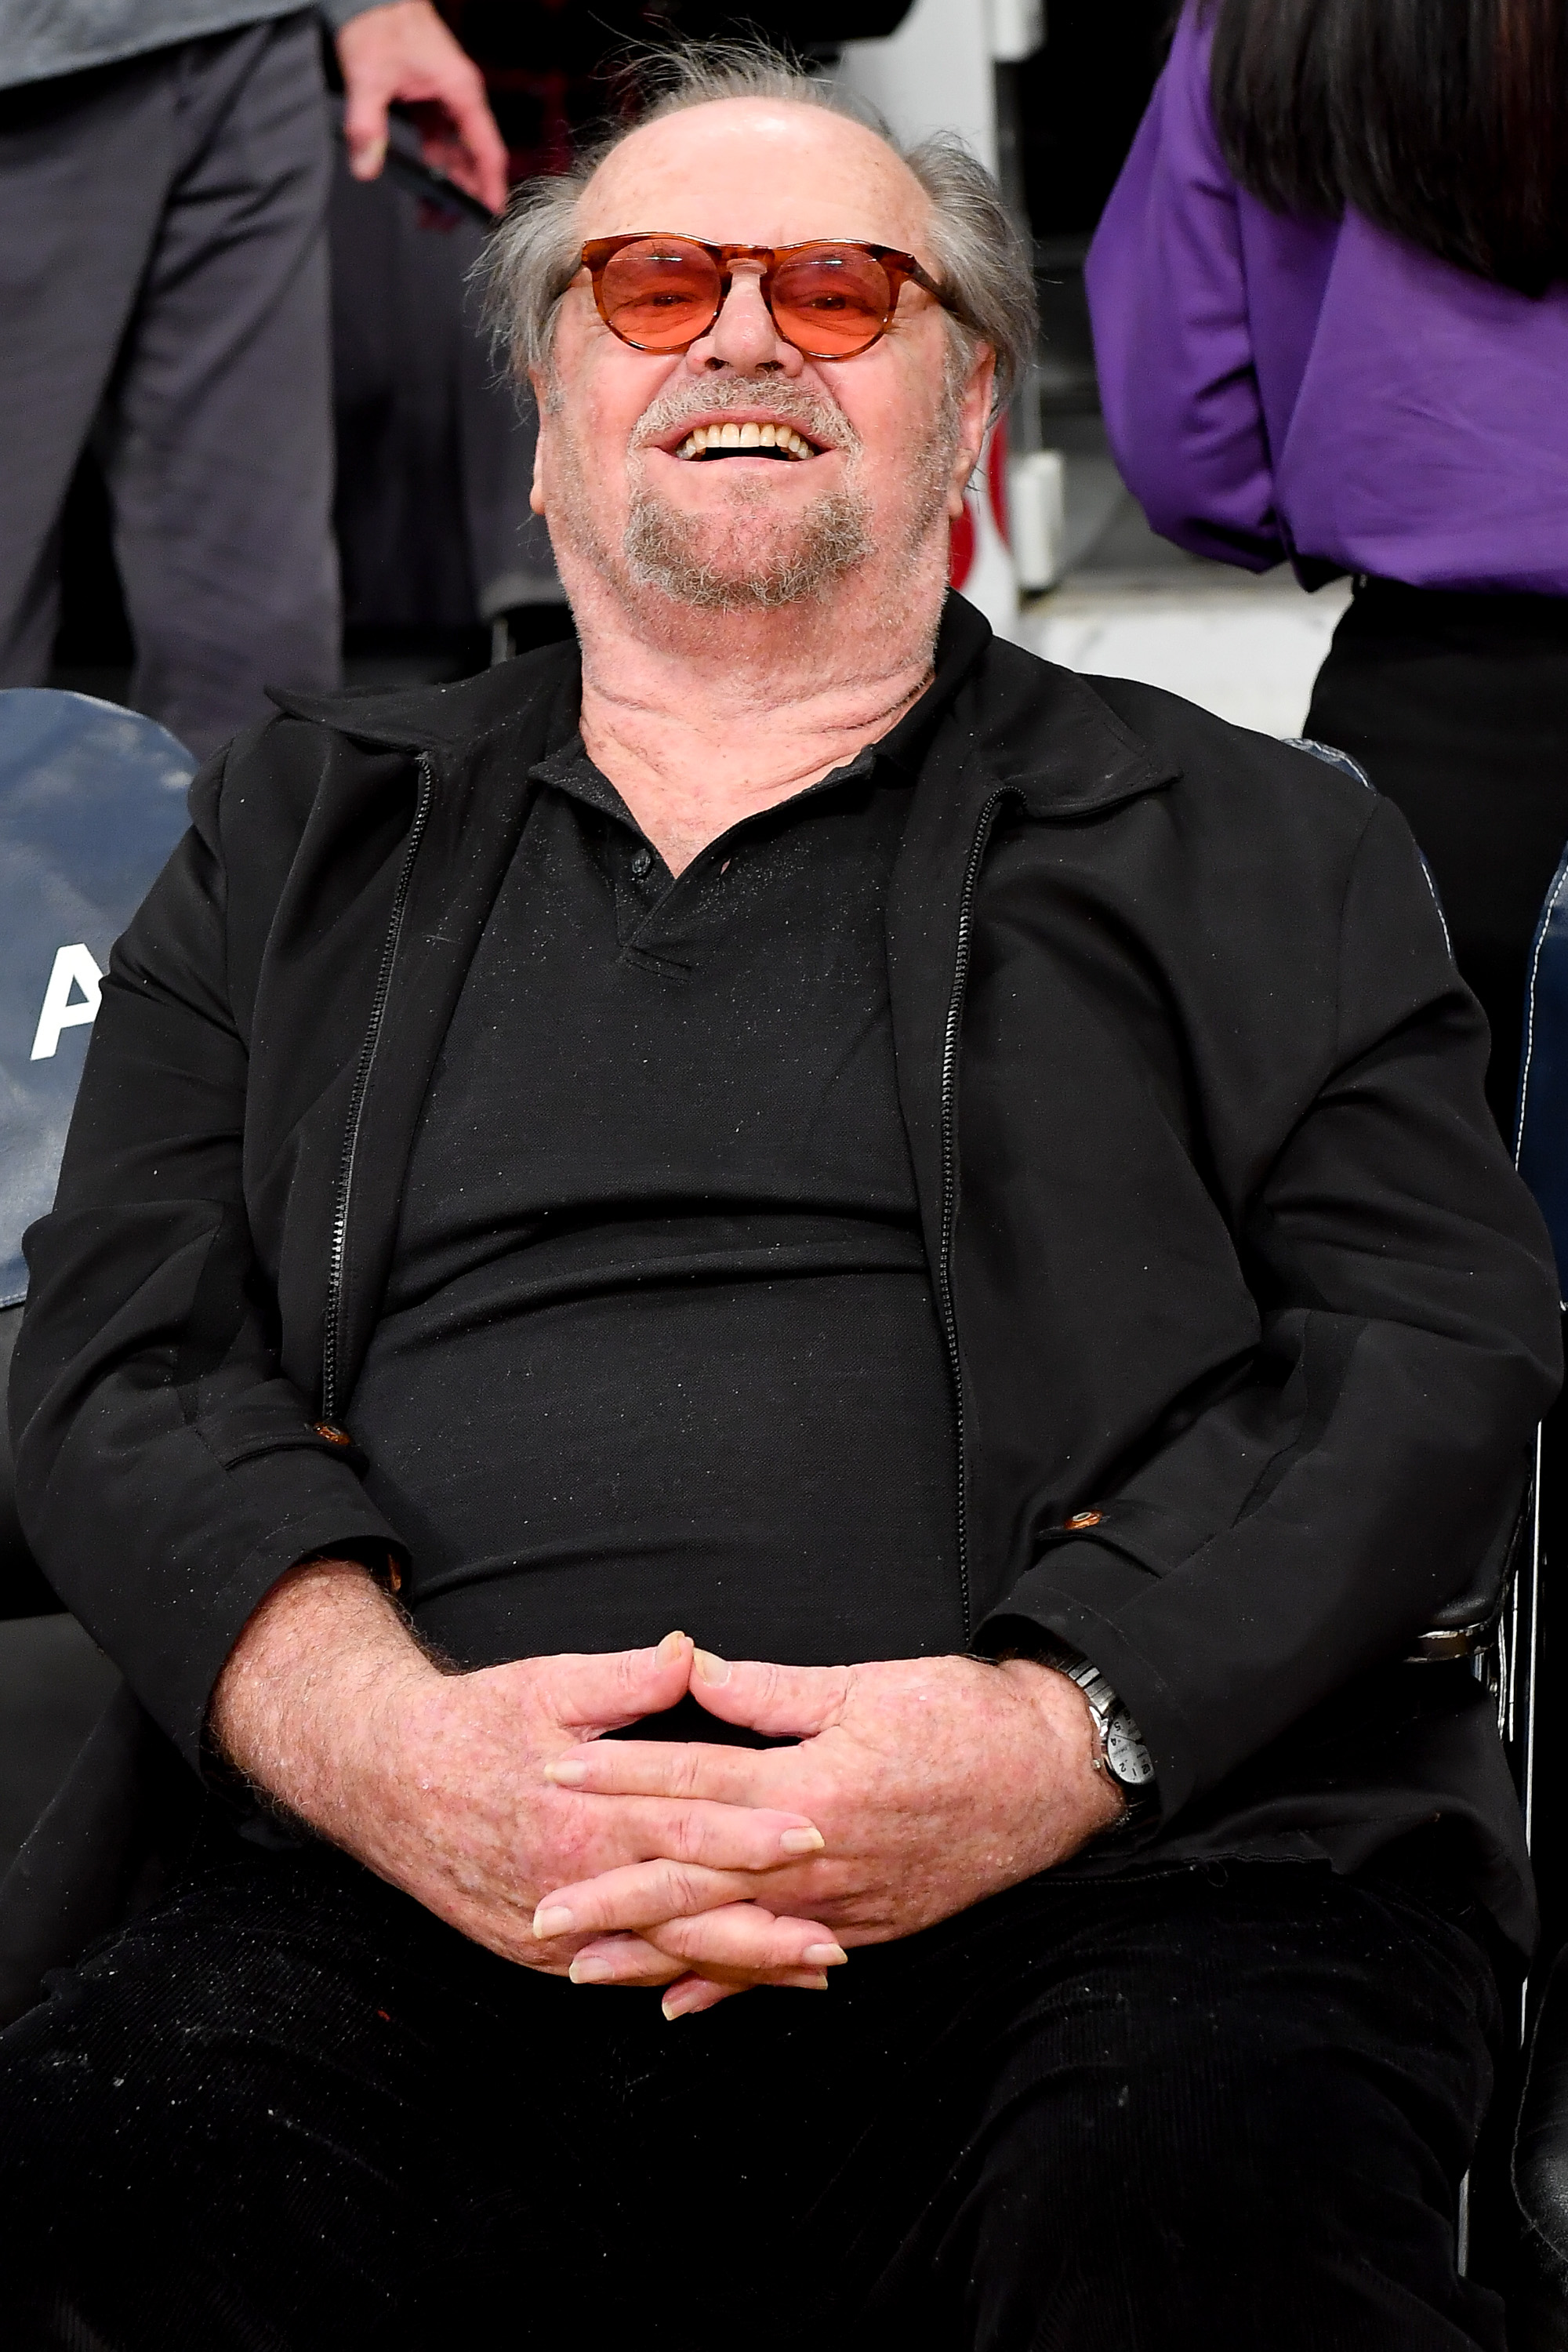 Jack Nicholson attends a basketball on January 7, 2020 in Los Angeles, California. | Source: Getty Images